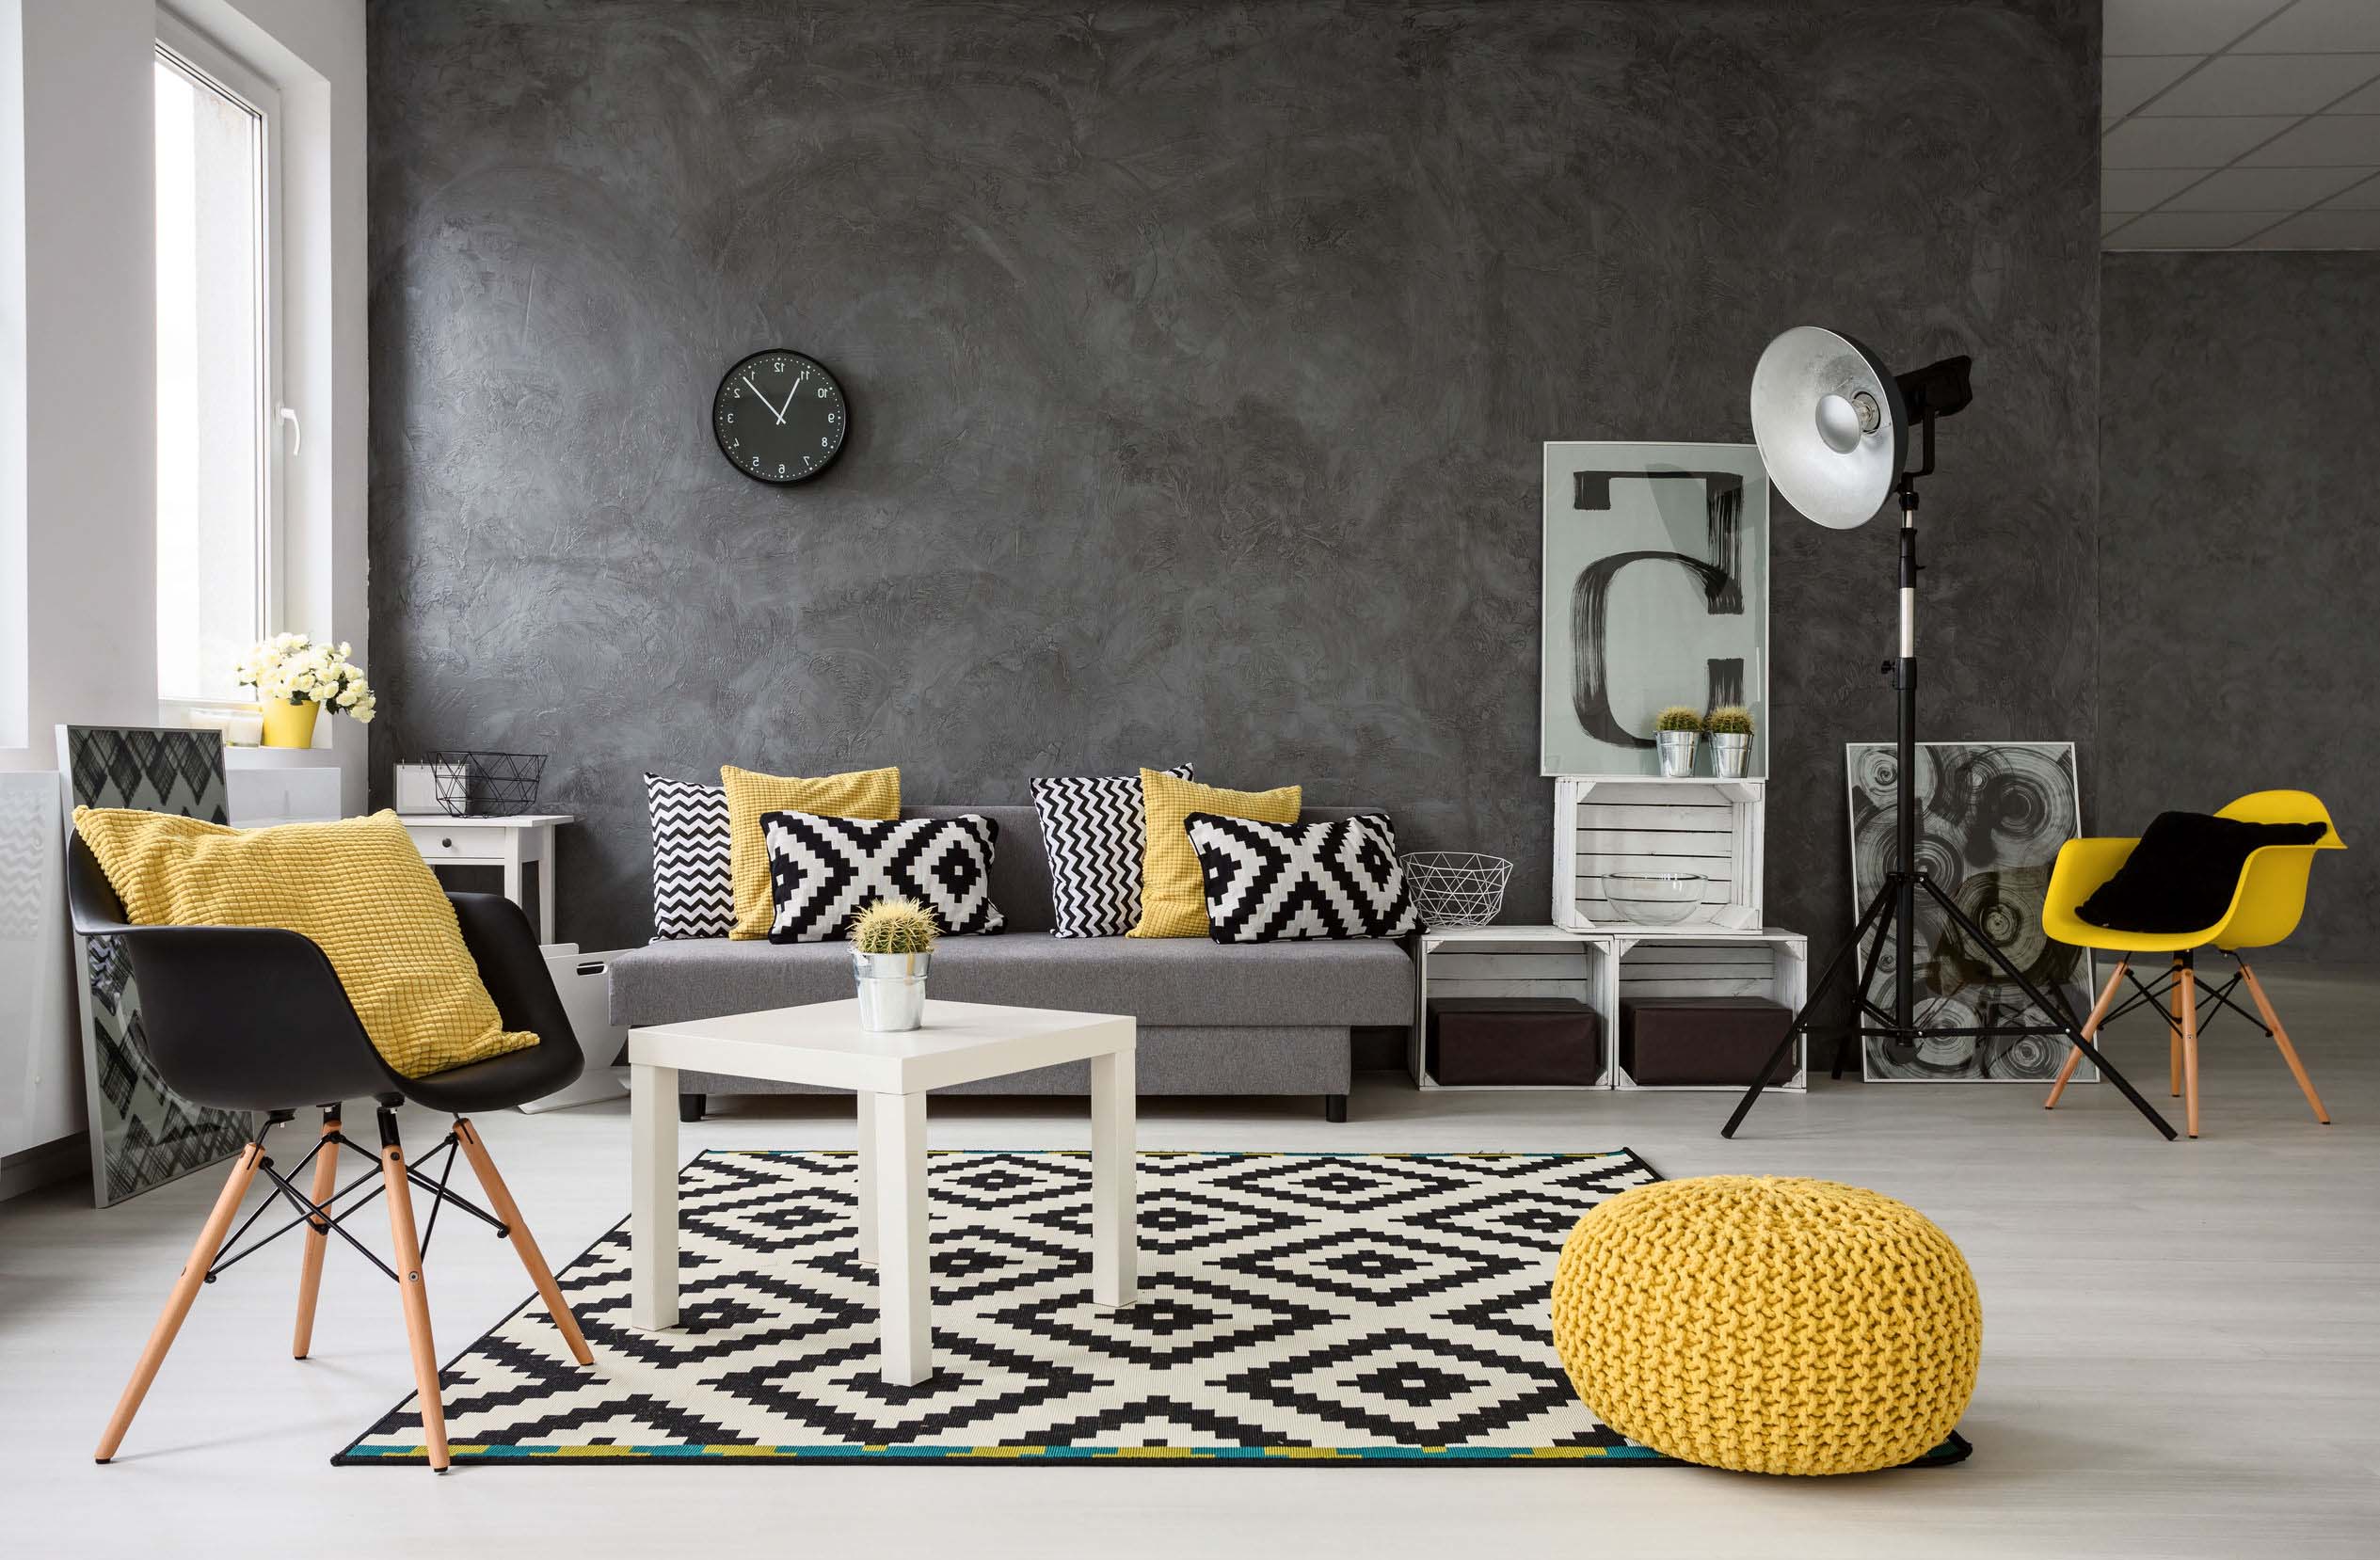 spacious, grey living room with sofa, chairs, standing lamp, small coffee-table, decorations in yellow, black and white. Behind the sofa there is a dark gray microcement accent wall